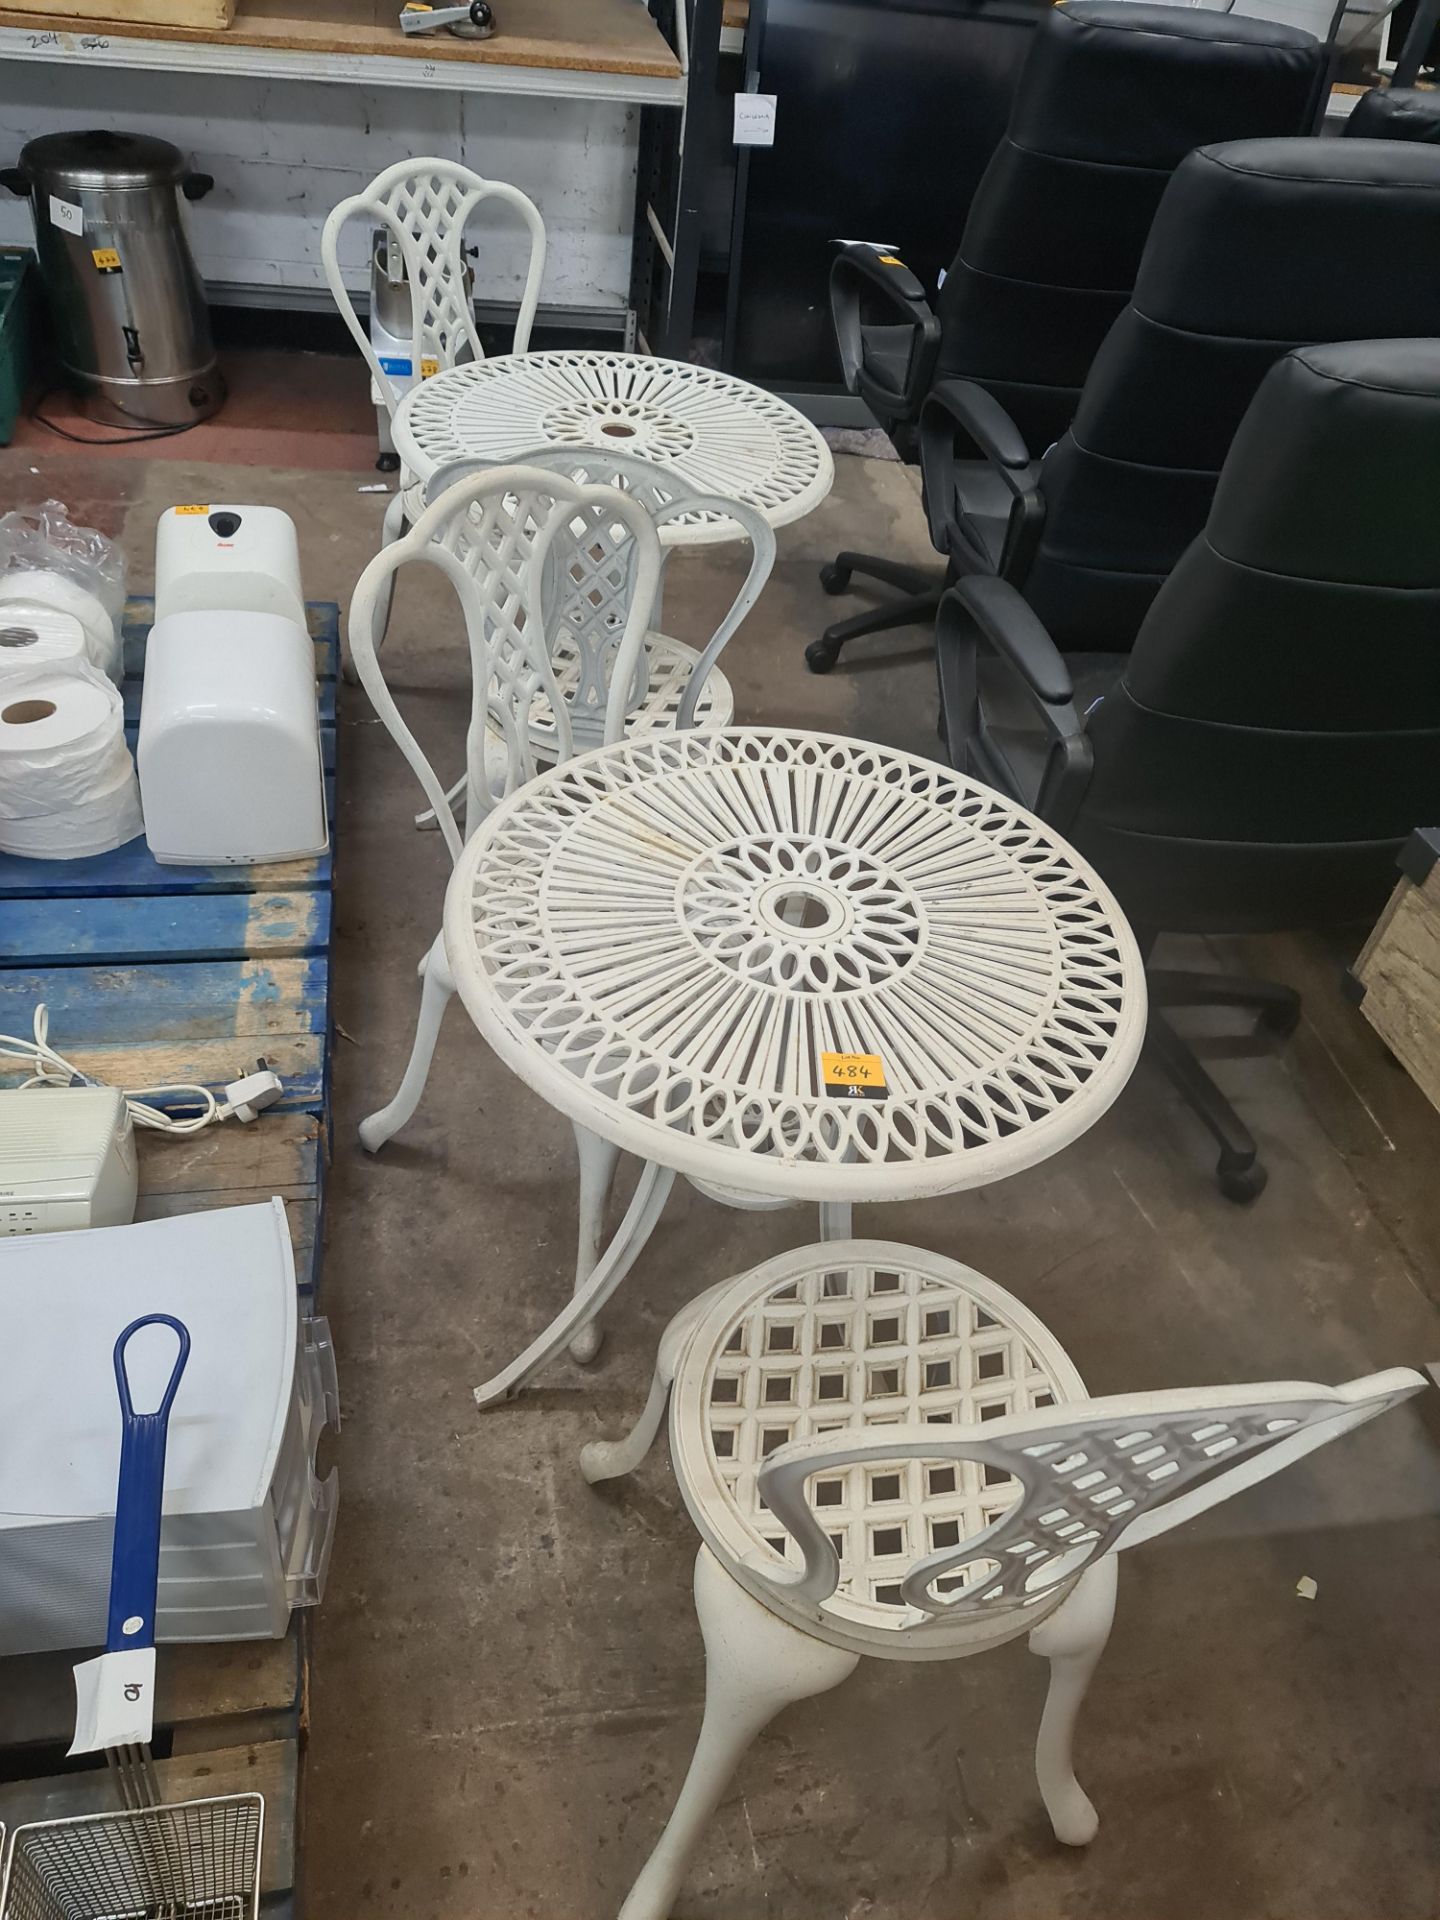 2 off outdoor café seating sets each comprising table and 2 chairs